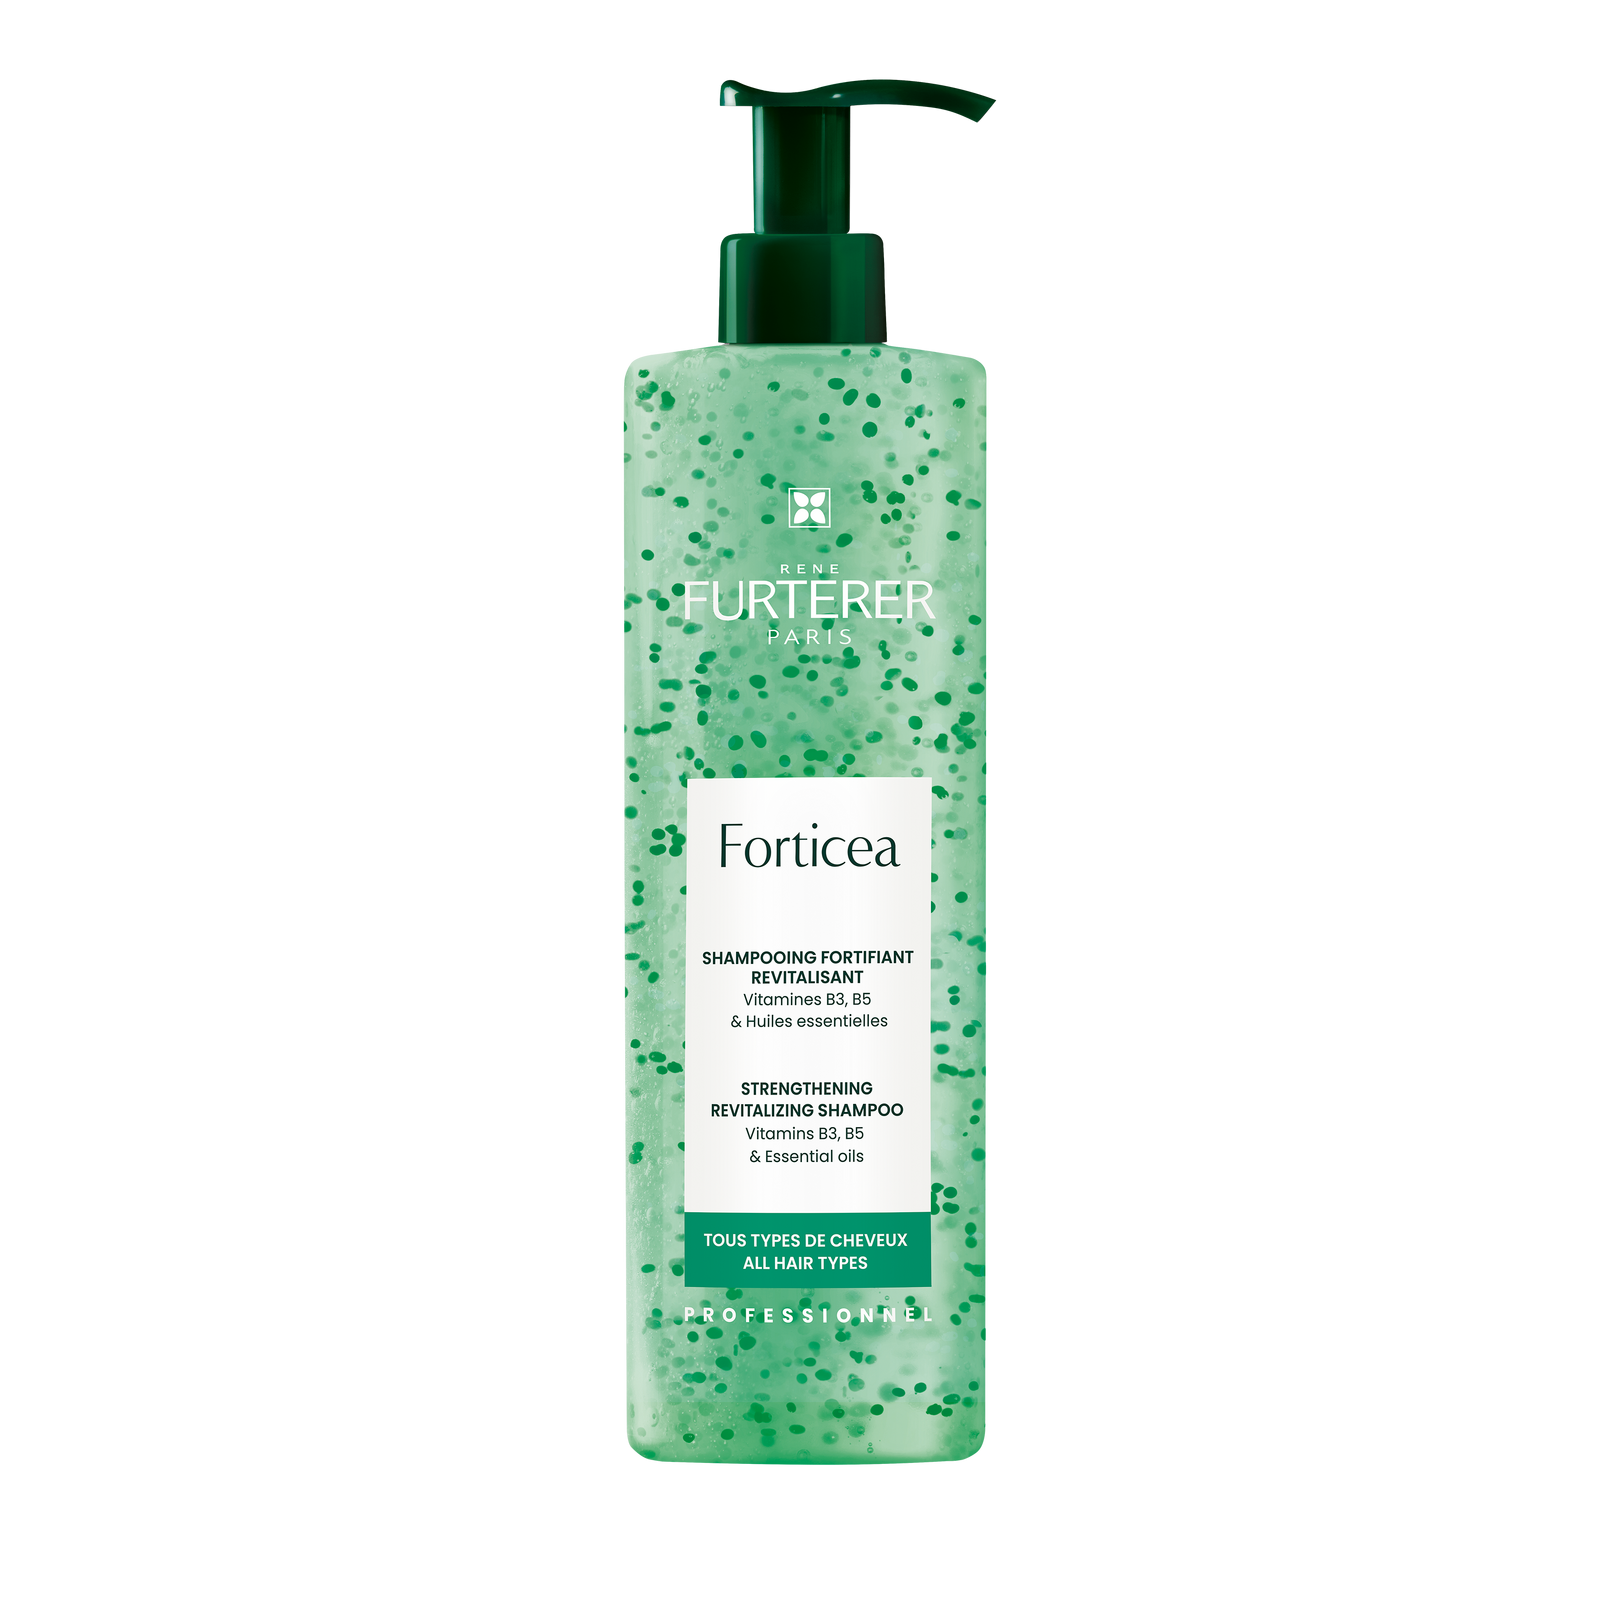 Fortifying and revitalizing shampoo with vitamins B3, B5 and essential oils